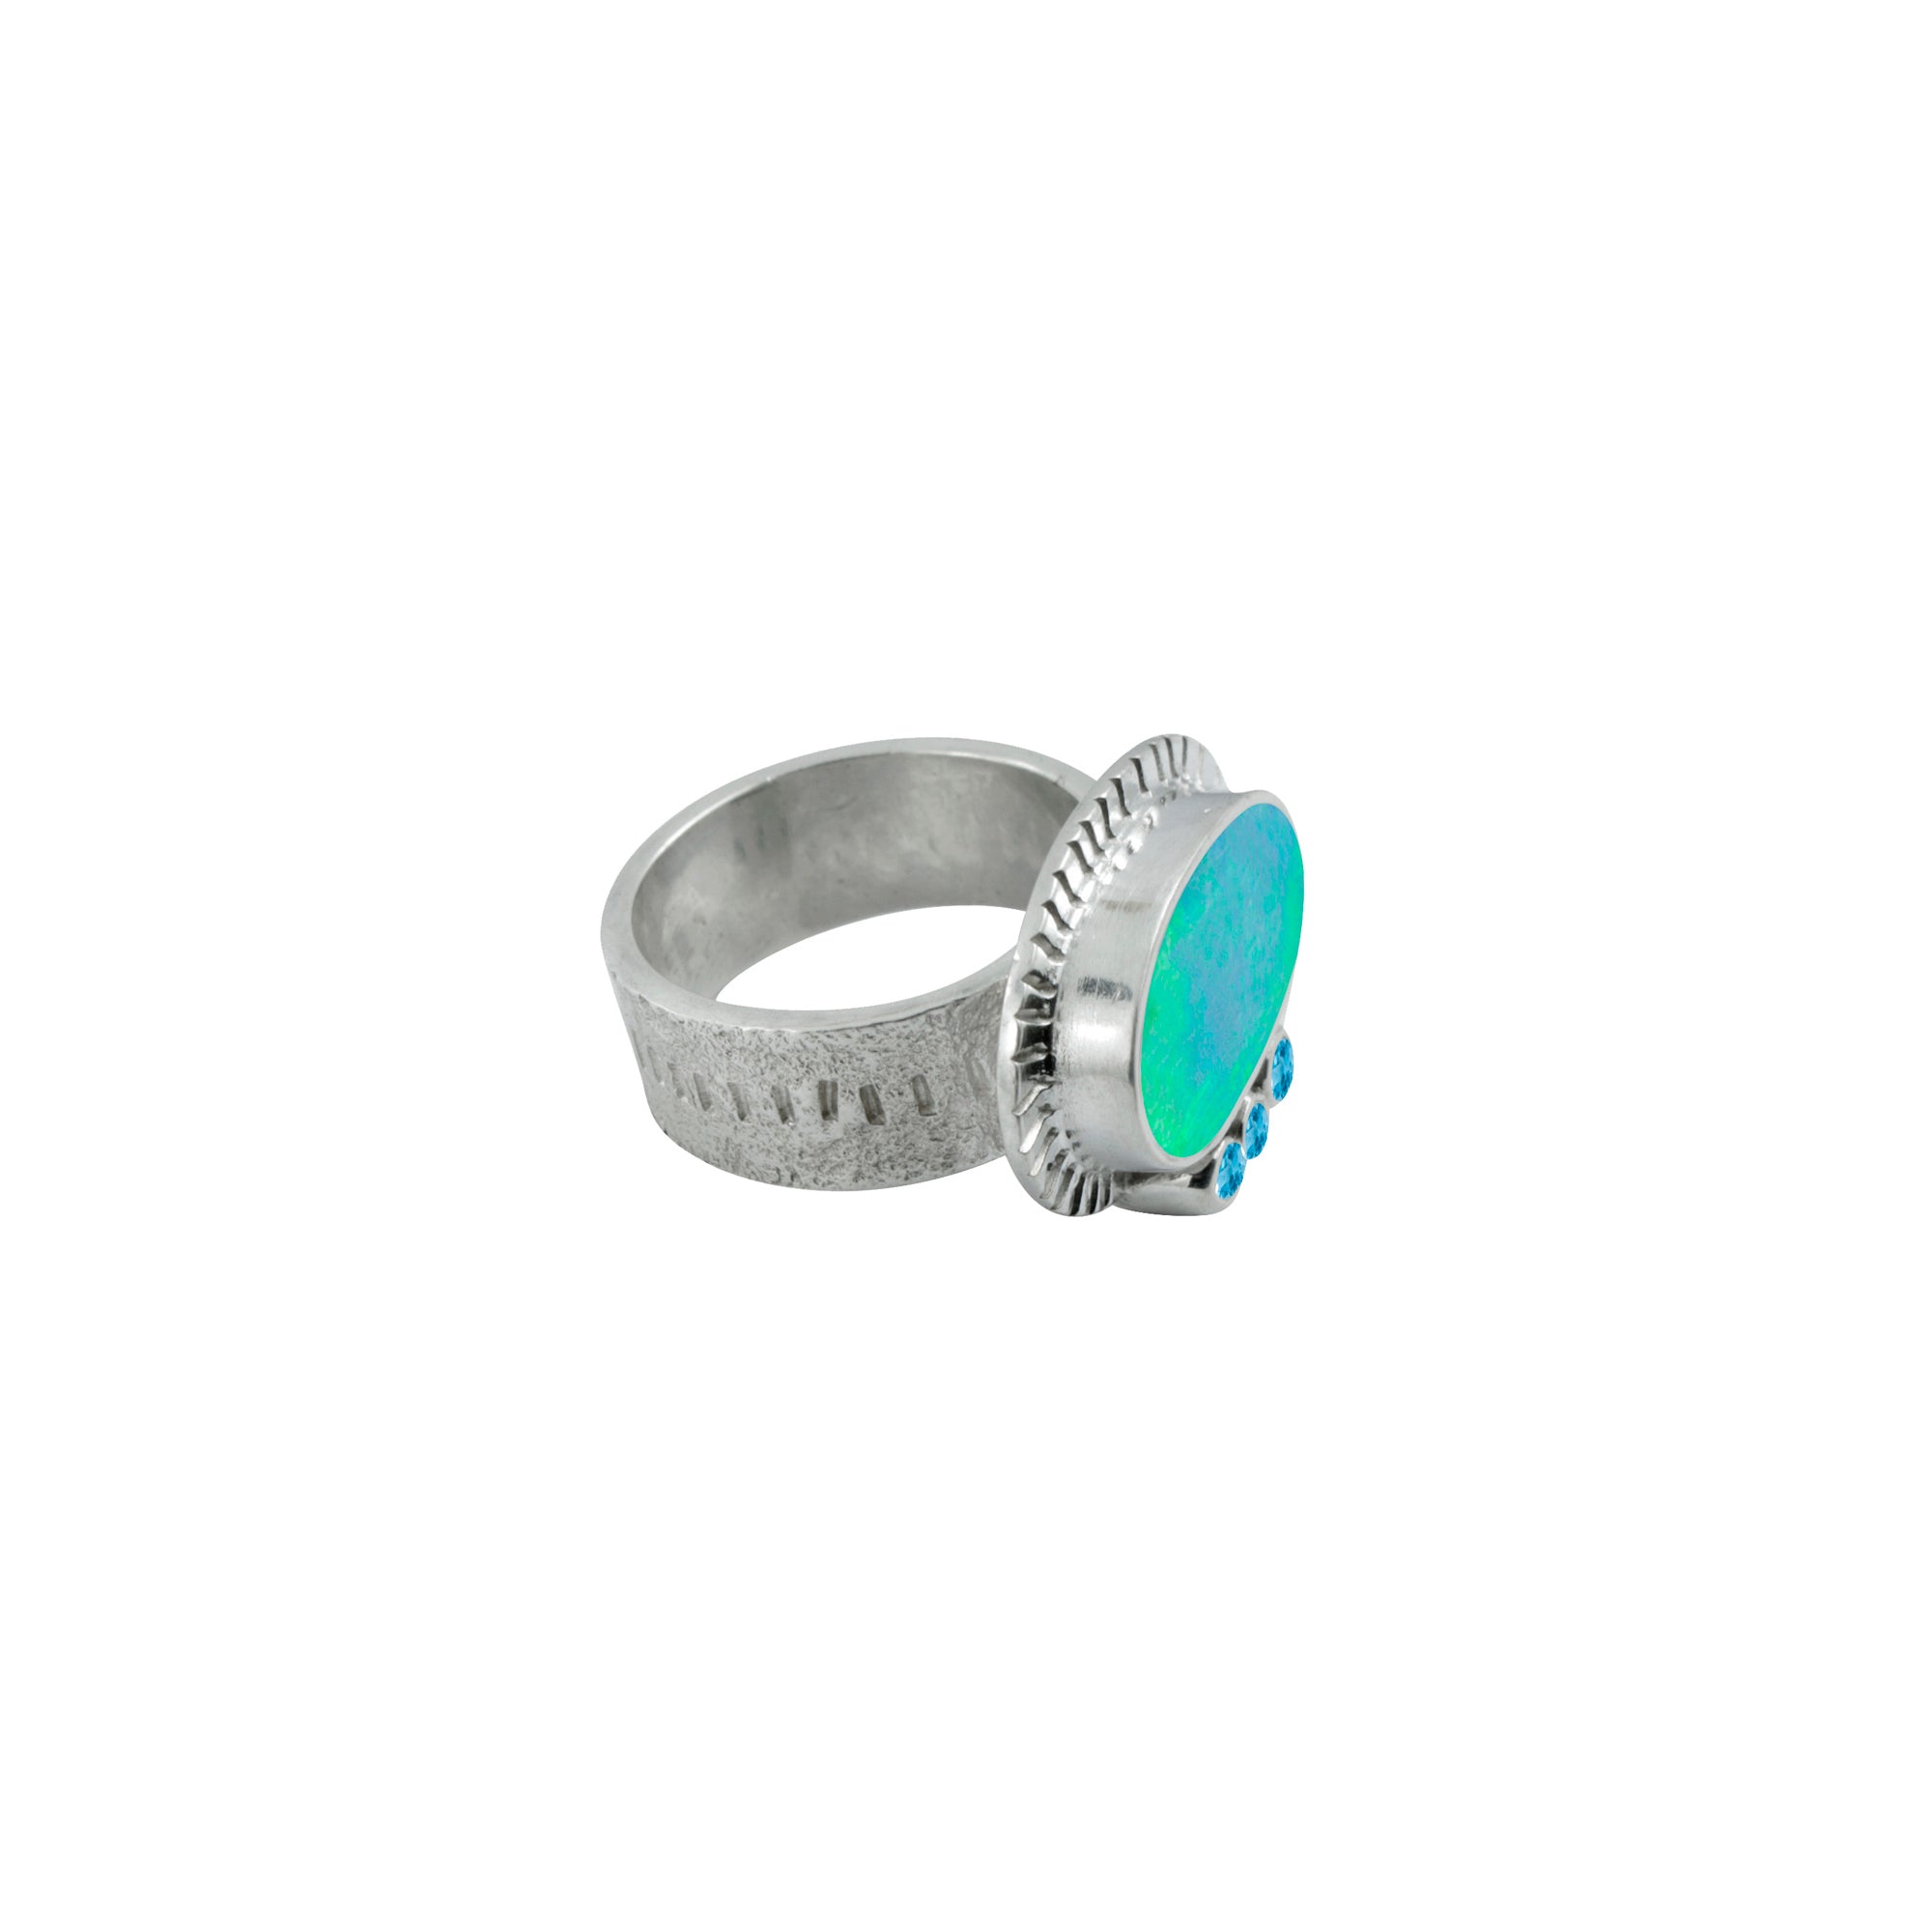 Silver Ring Texture Component With Opal Free Form & Blue Topaz Round